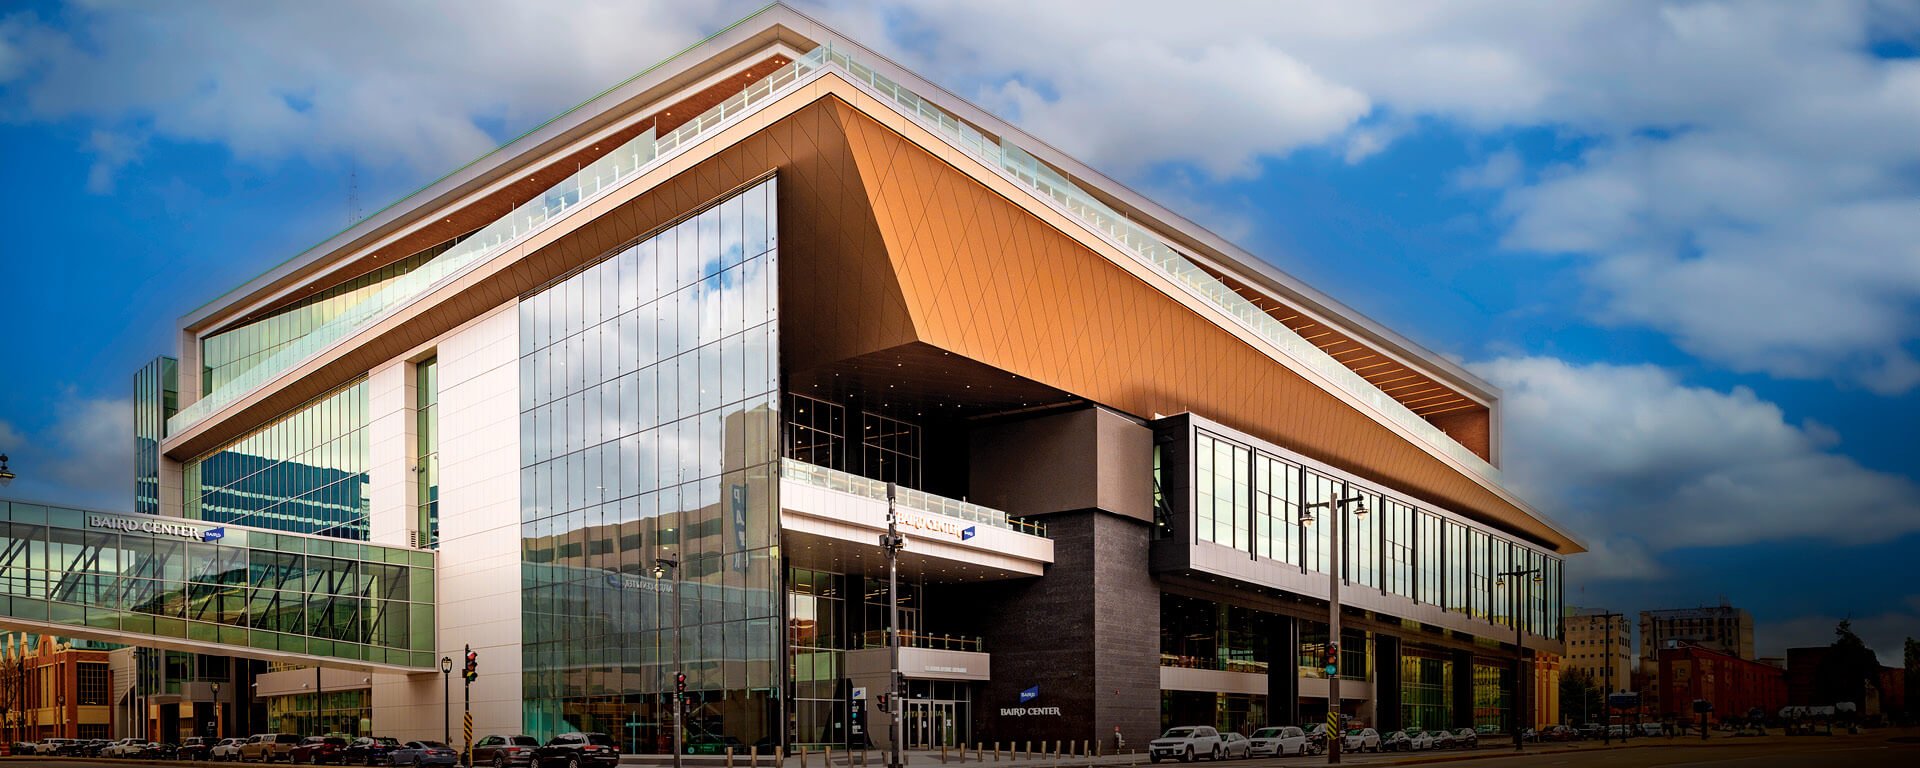 Photo of the exterior of the Baird Center